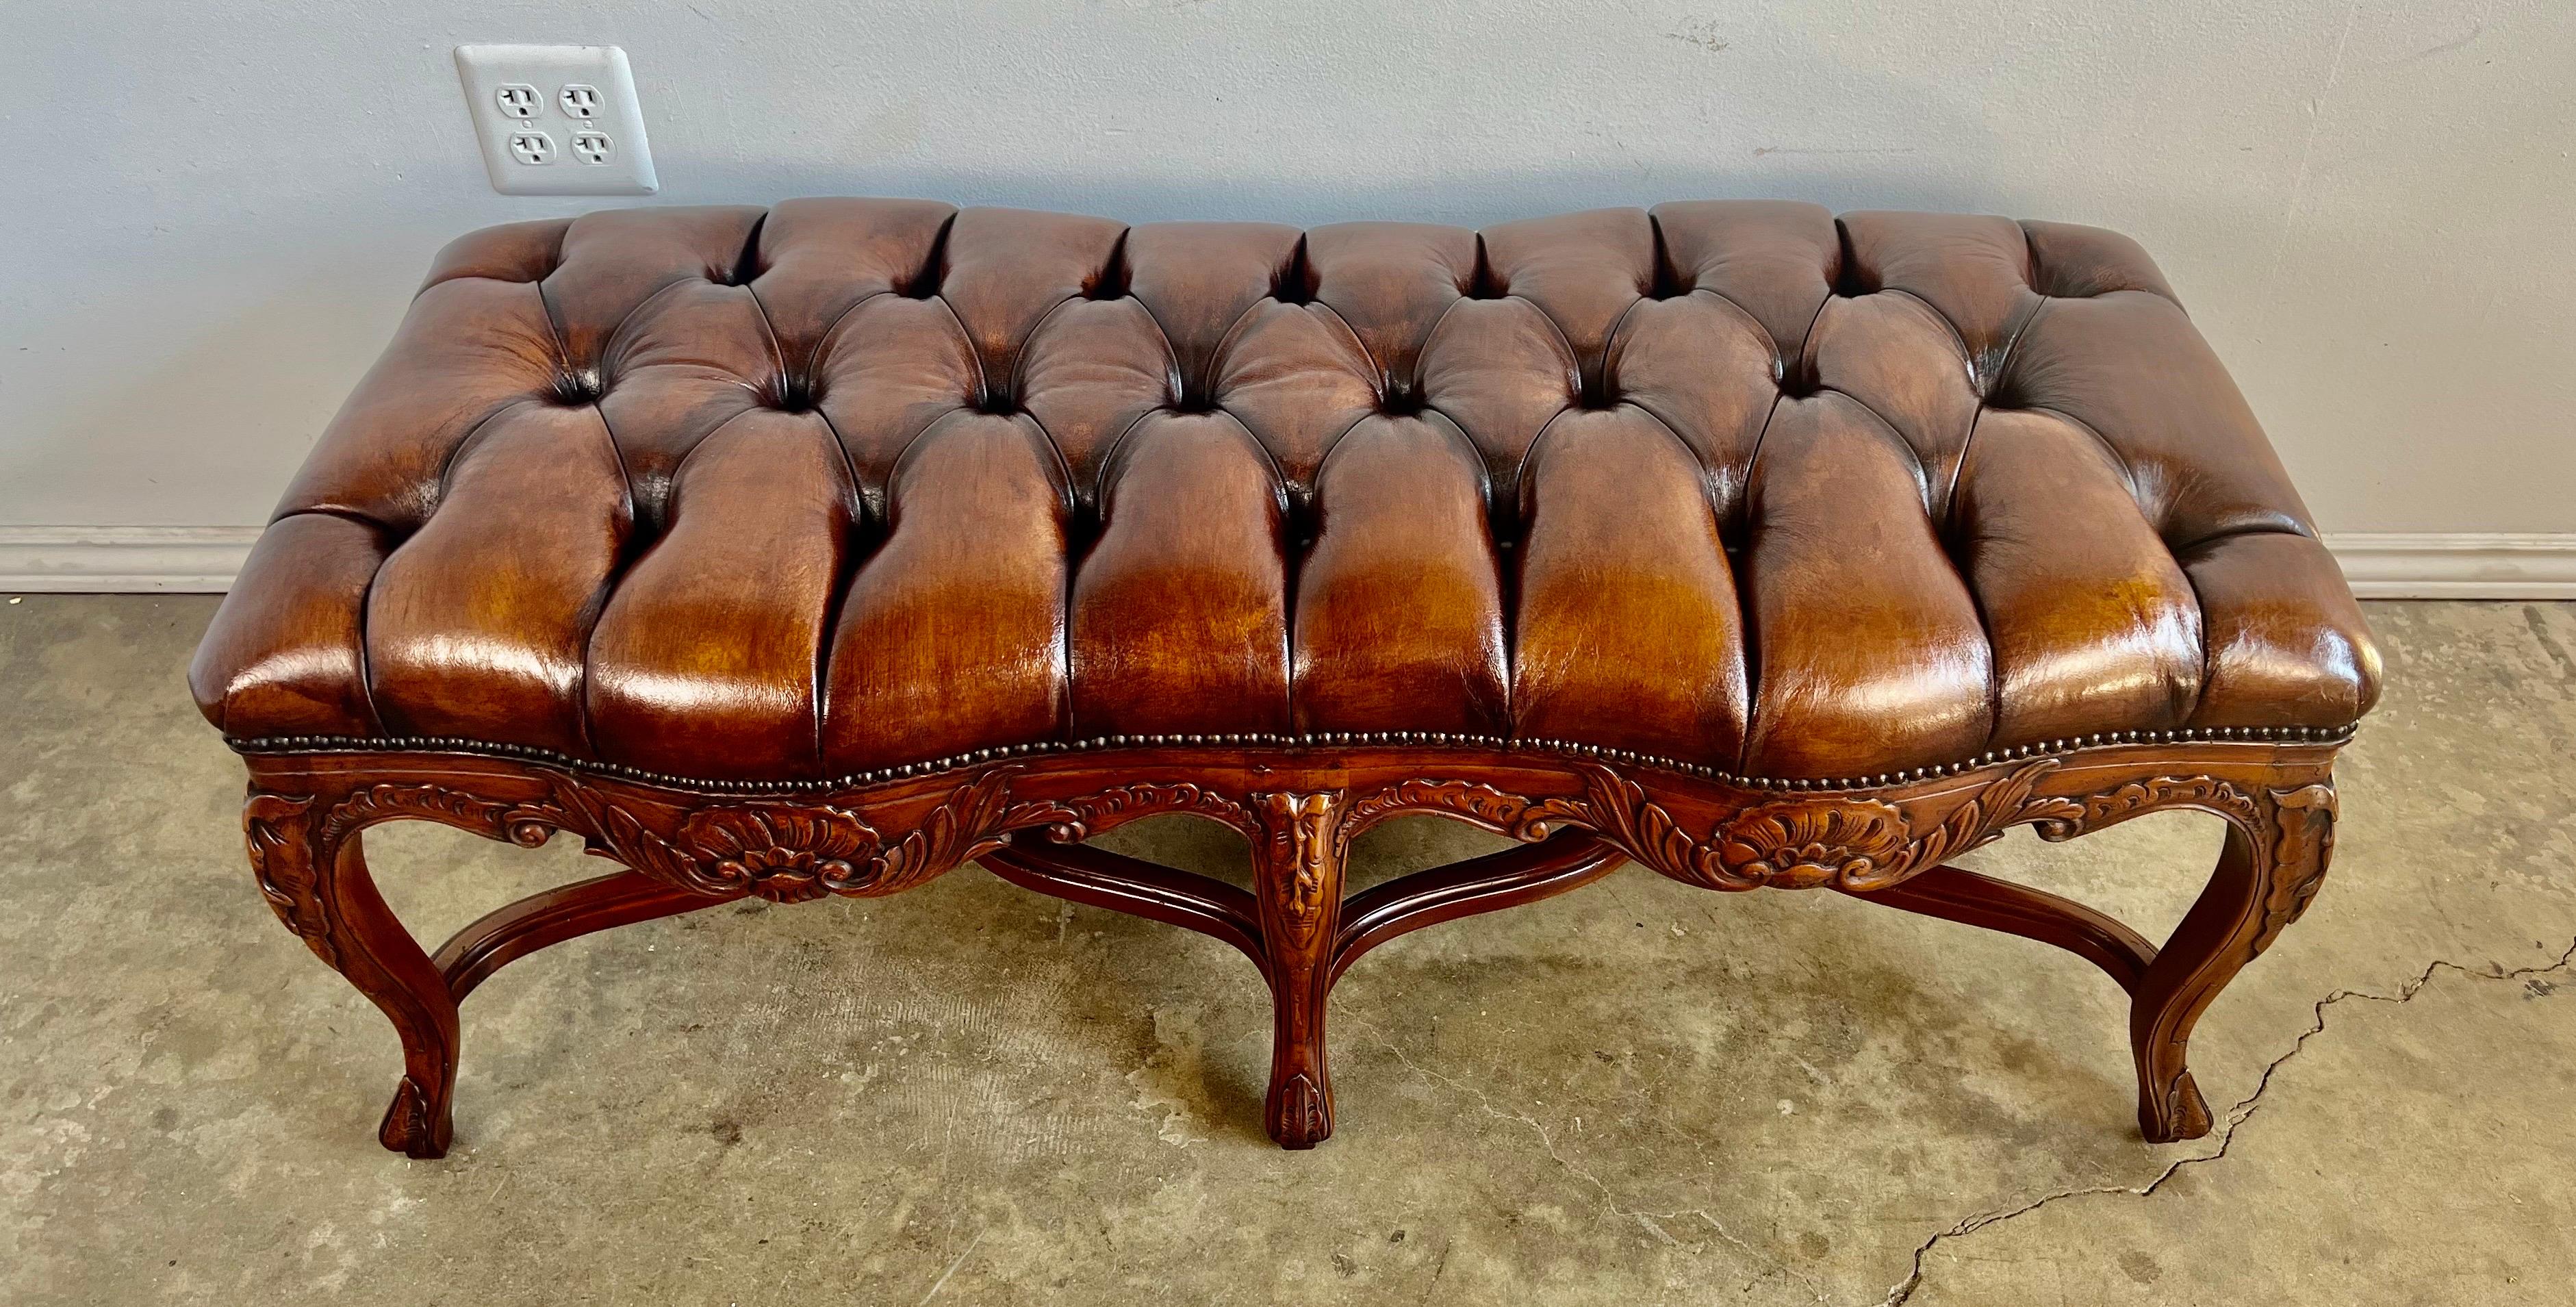 Early 20th century French Louis XV style carved walnut bench. The bench stands on six cabriole legs with rams head feet. A double 